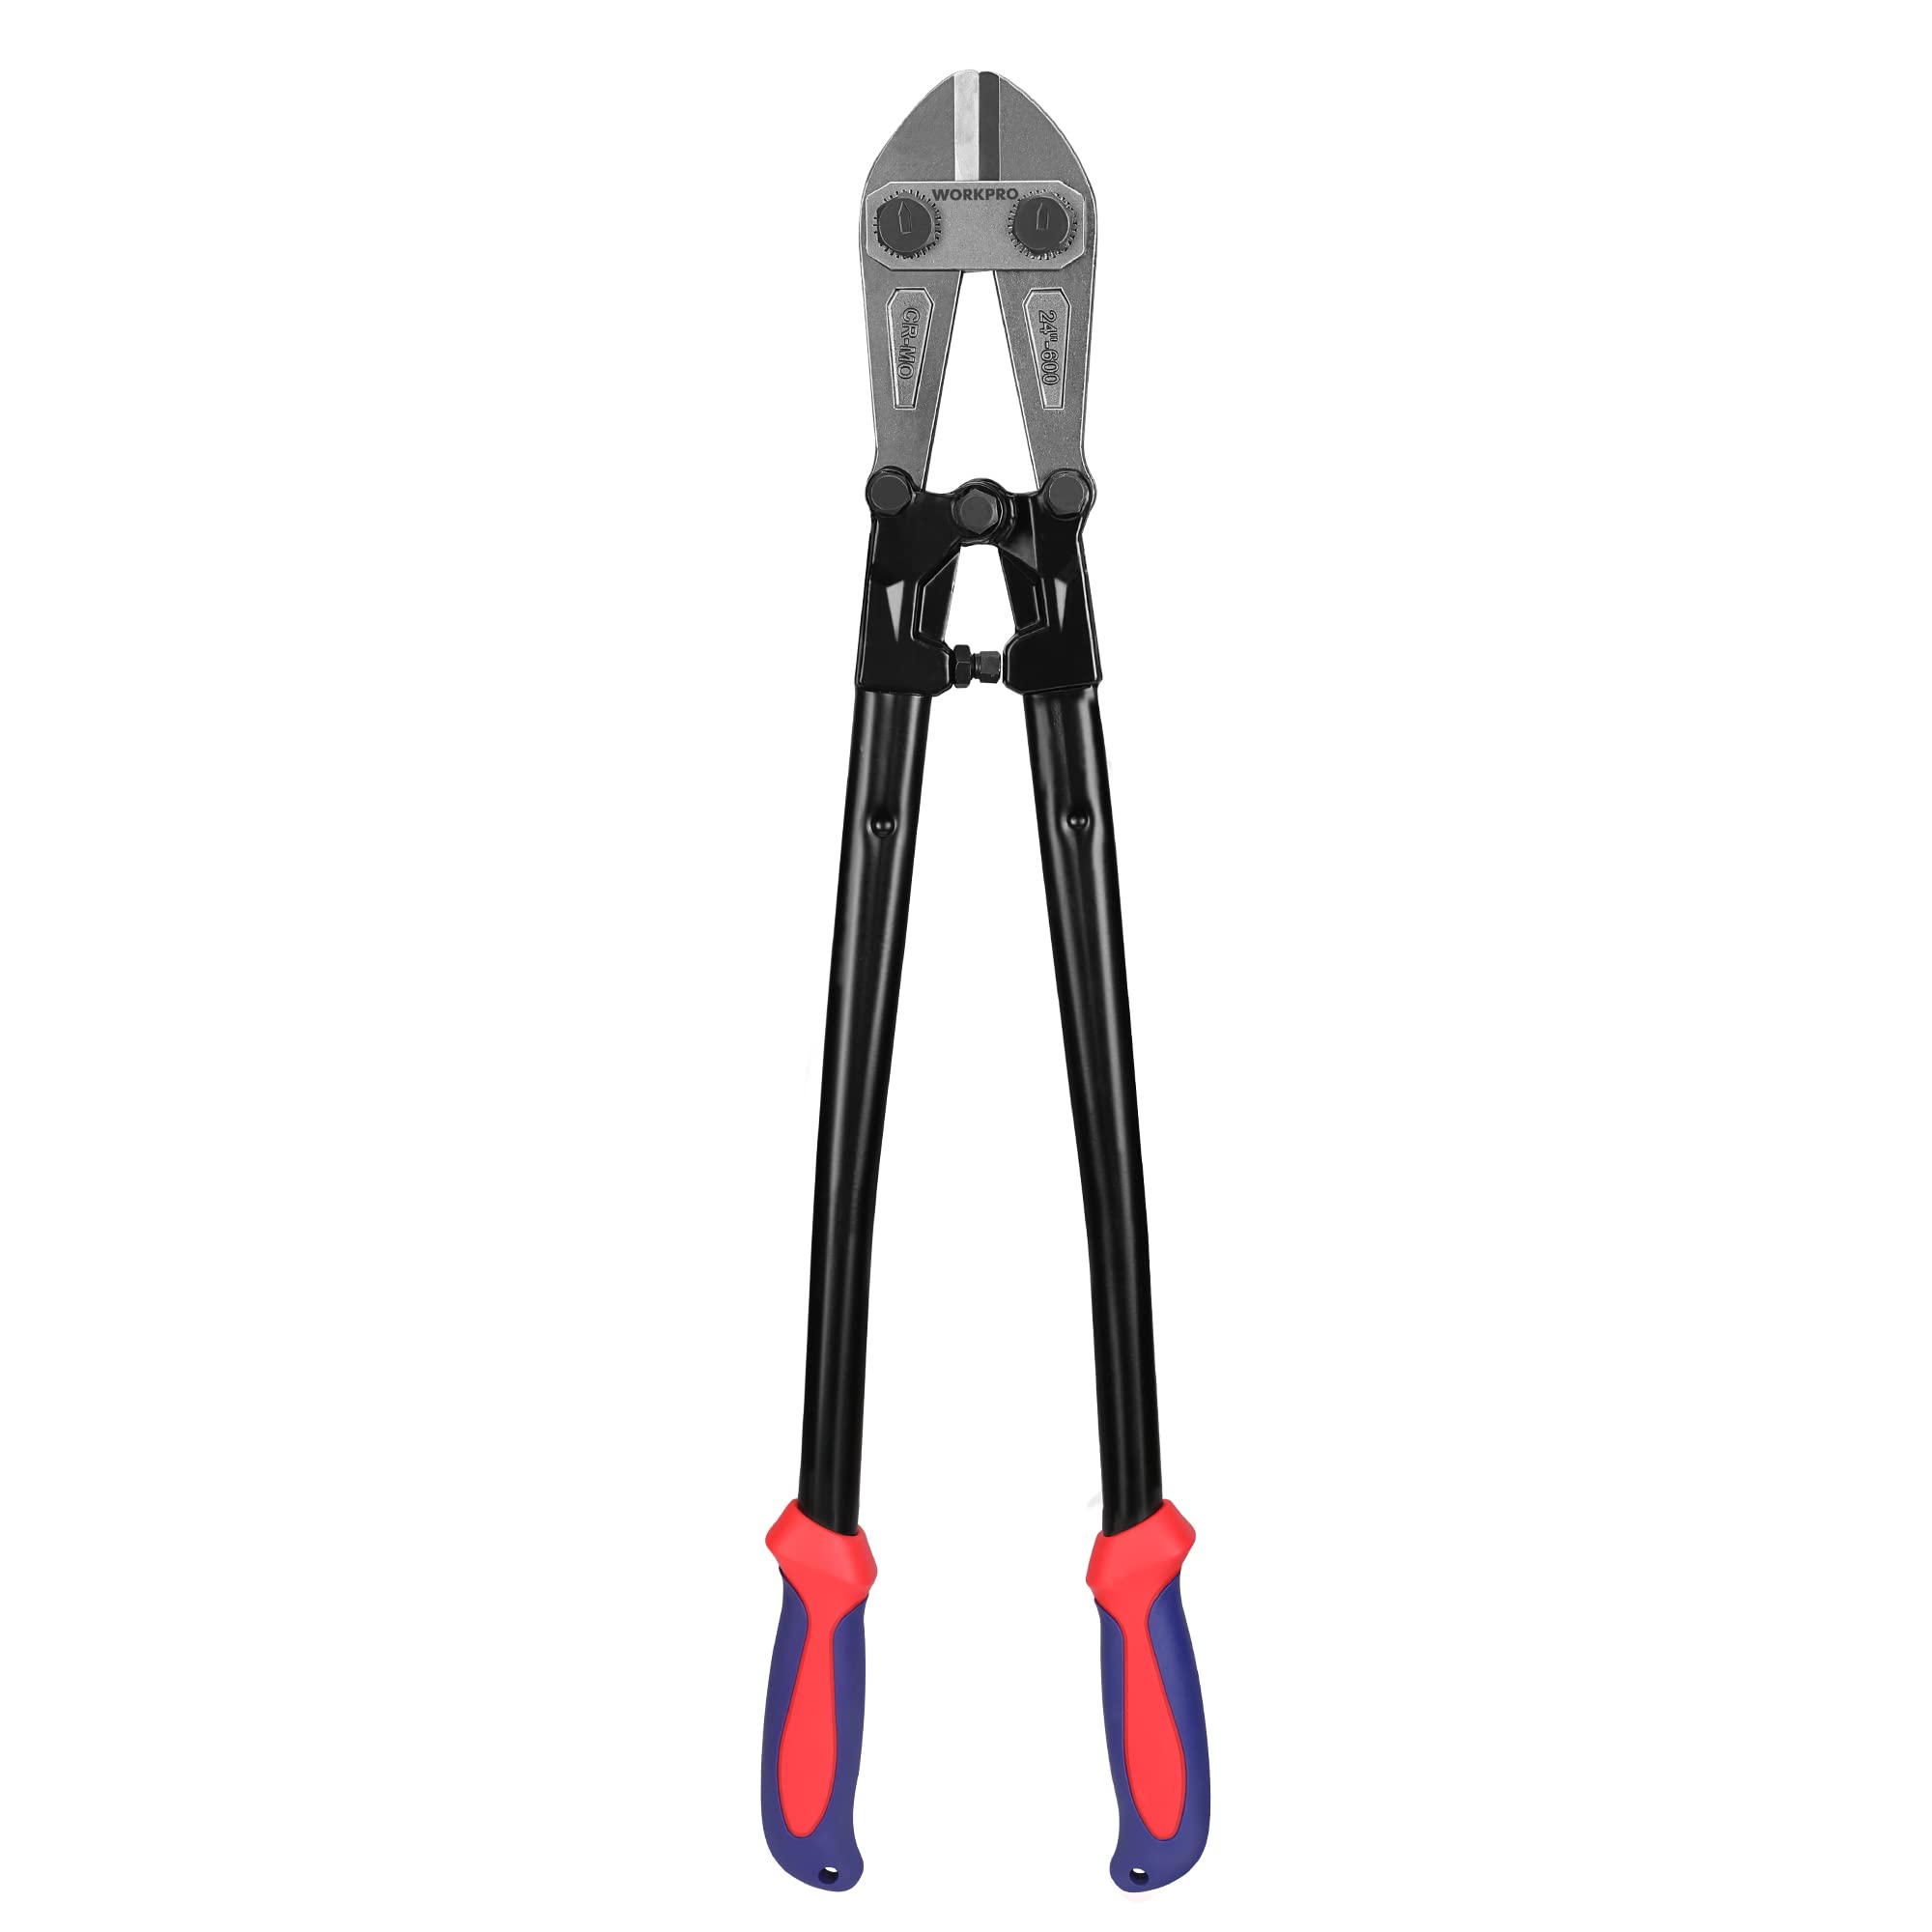 WORKPRO W017006A Bolt Cutter, Bi-Material Handle with Soft Rubber Grip, 24", Chrome Molybdenum Steel Blade